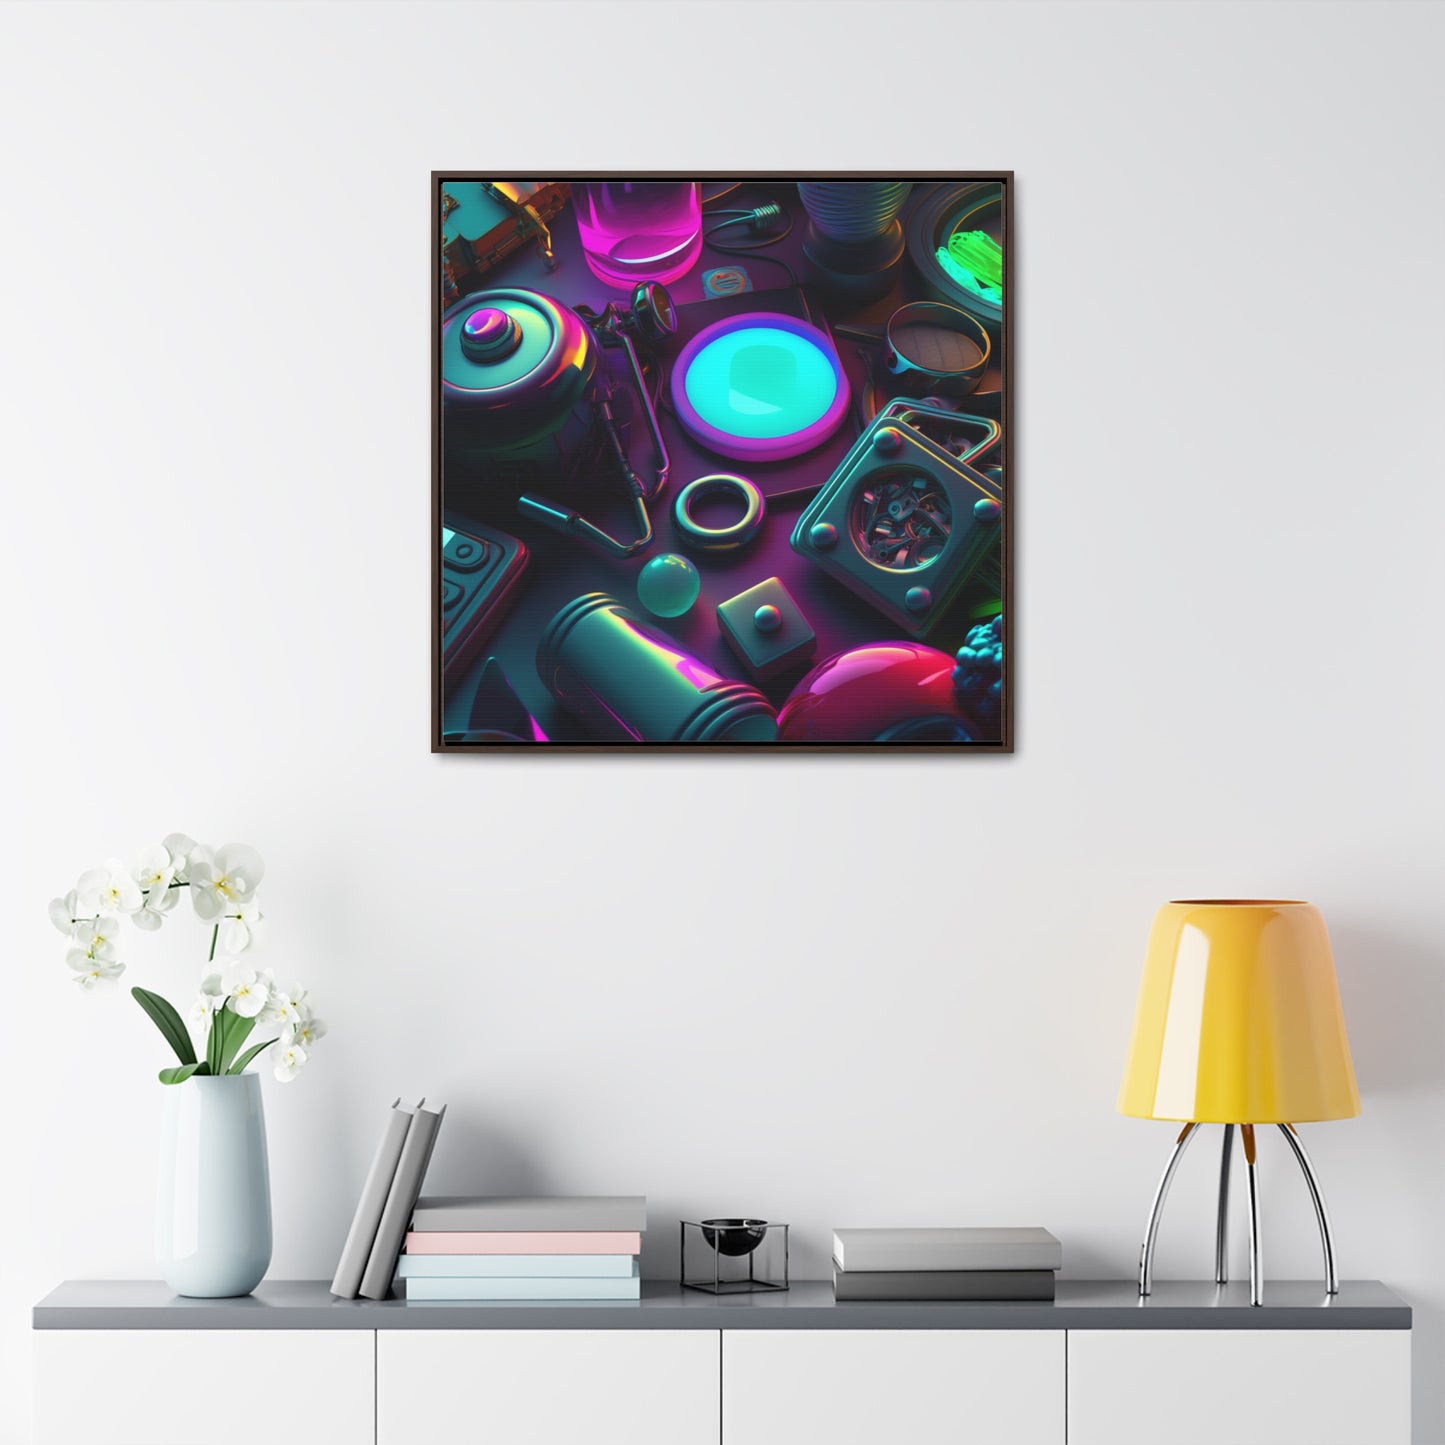 Gallery Canvas Wraps, Square Frame Neon Glow 4